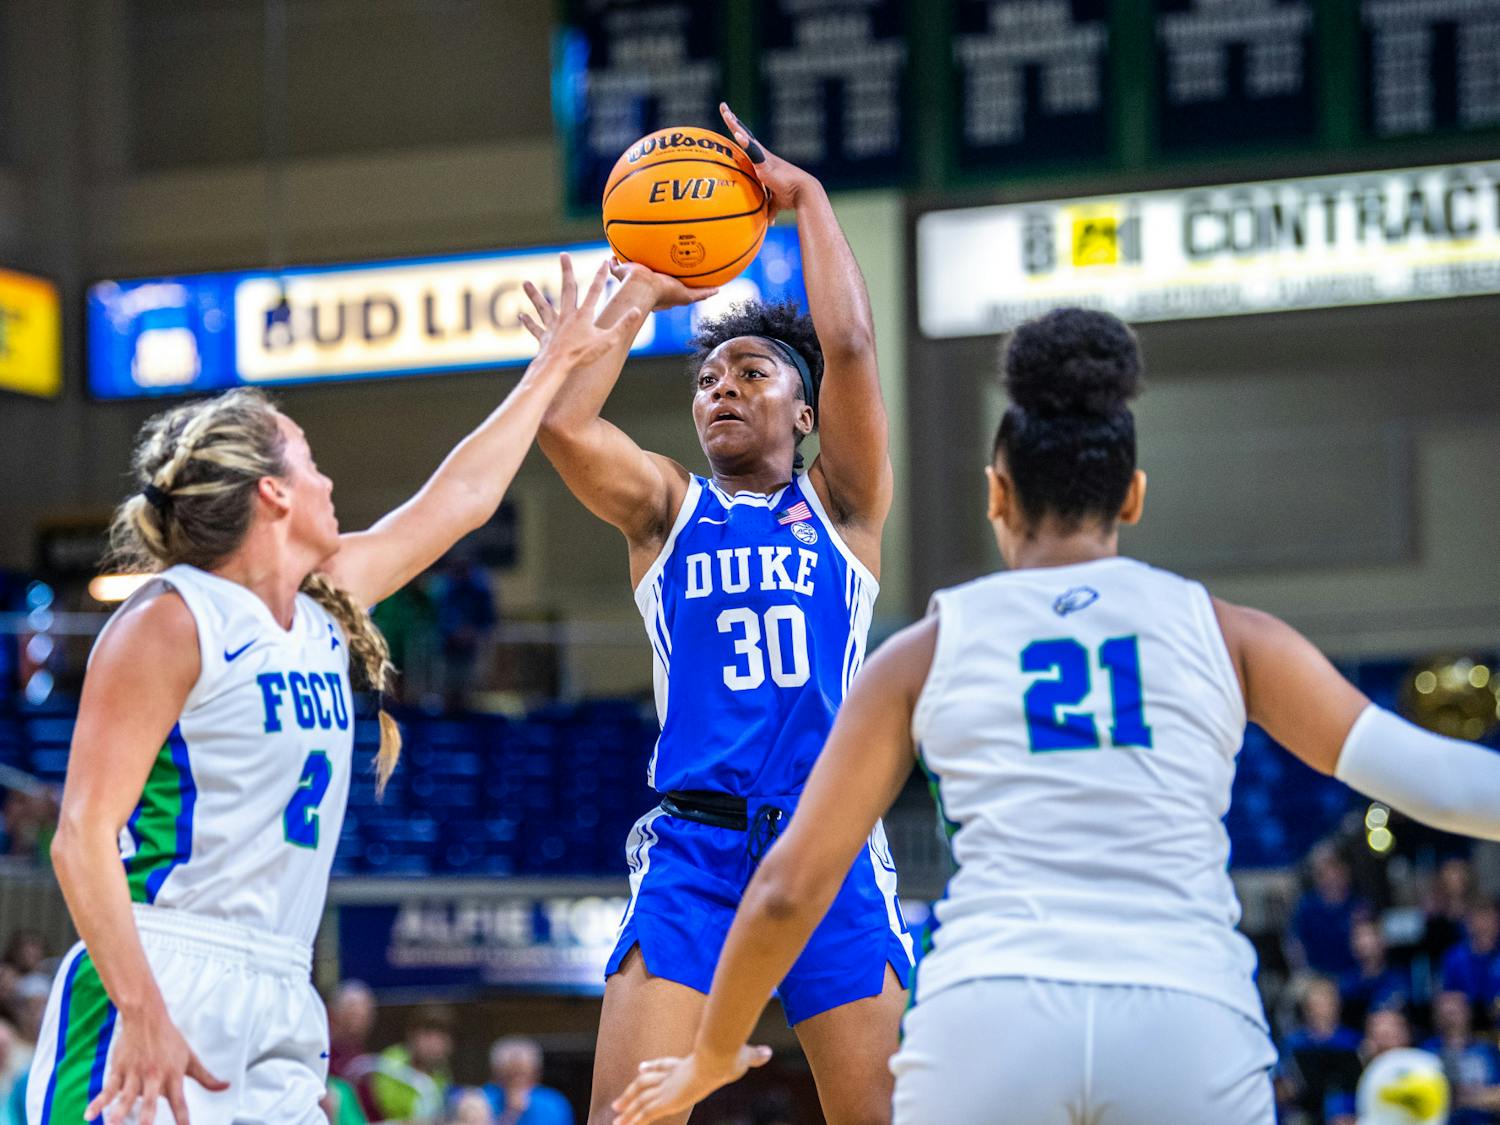 Duke won big in its final nonconference game of the season at Florida Gulf Coast.